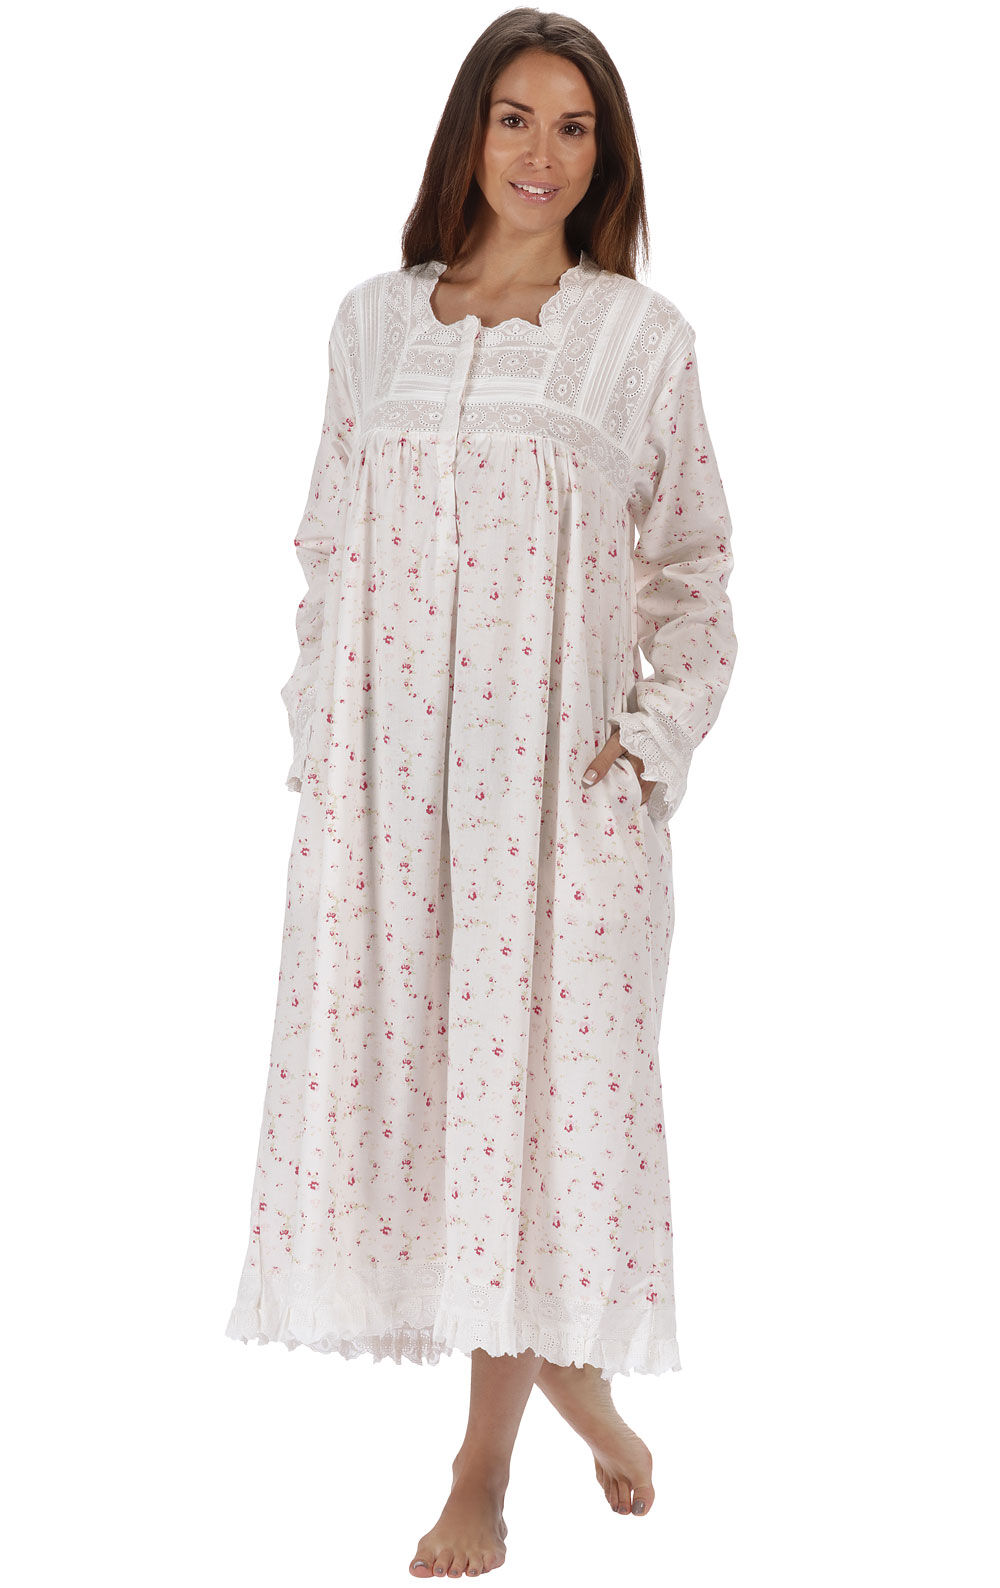 The 1 for U 100% Cotton Long Sleeve Nightdress with Pockets 7 Sizes Isabella